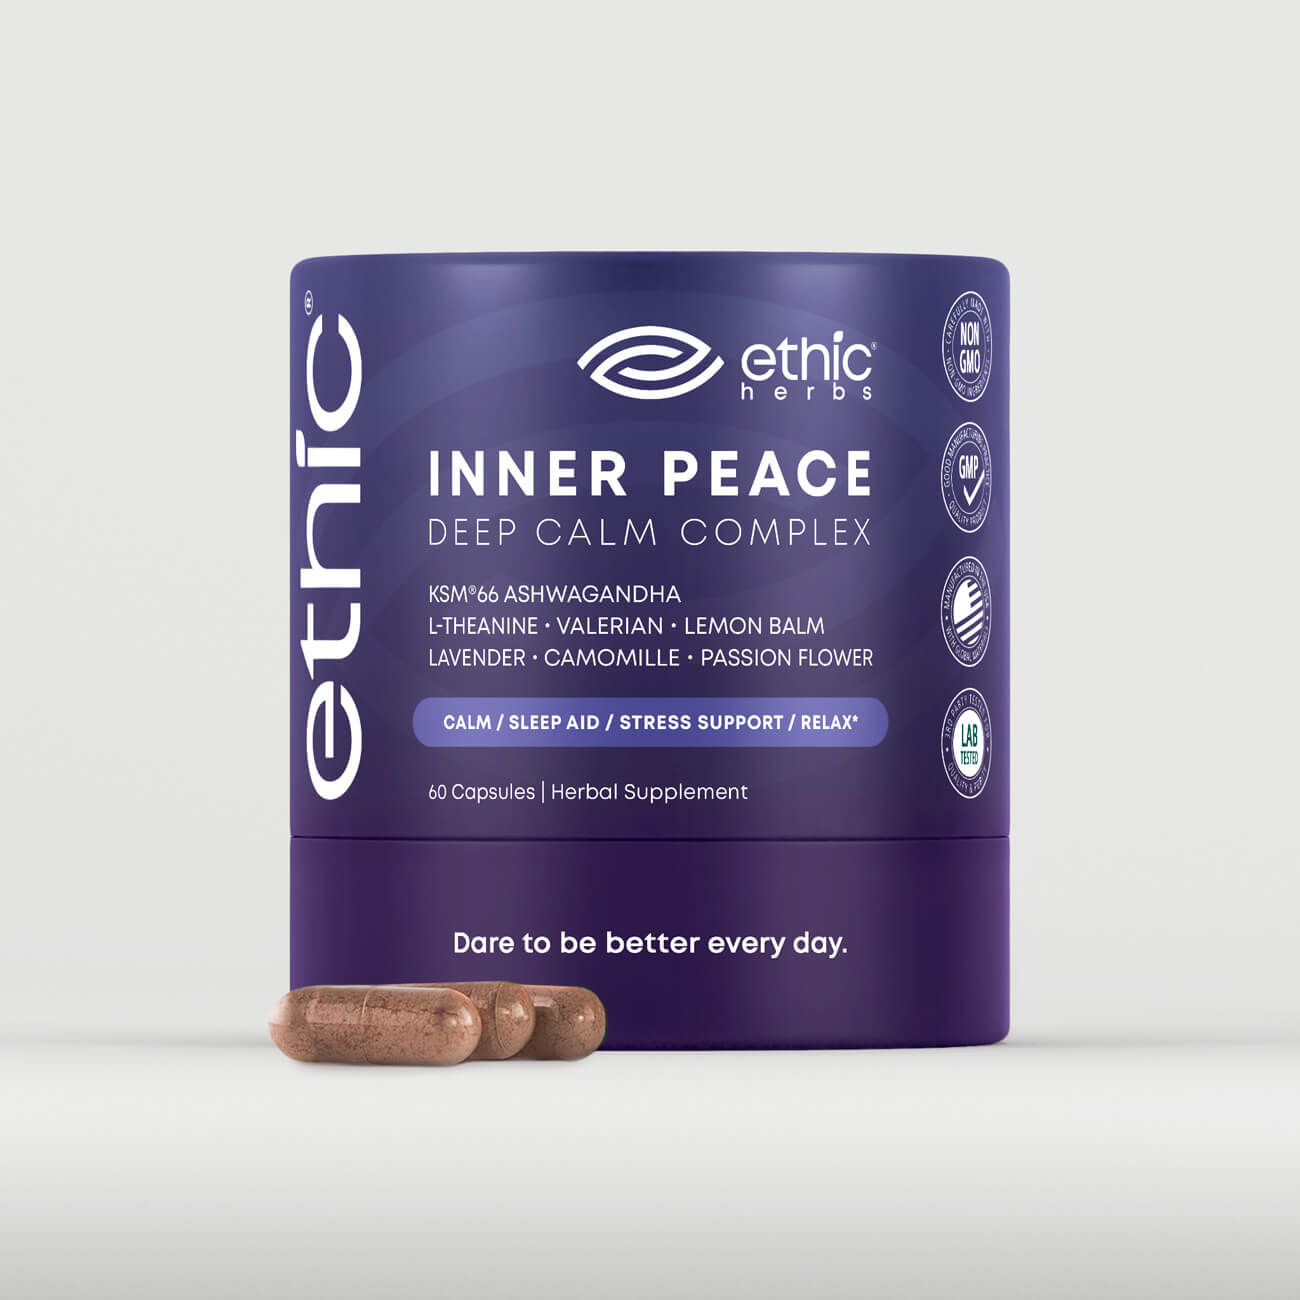 Ethic Herbs Natural Sleep Aid Supplement. INNER PEACE Deep Calm Complex Natural Sleep Aid Supplement with lavender